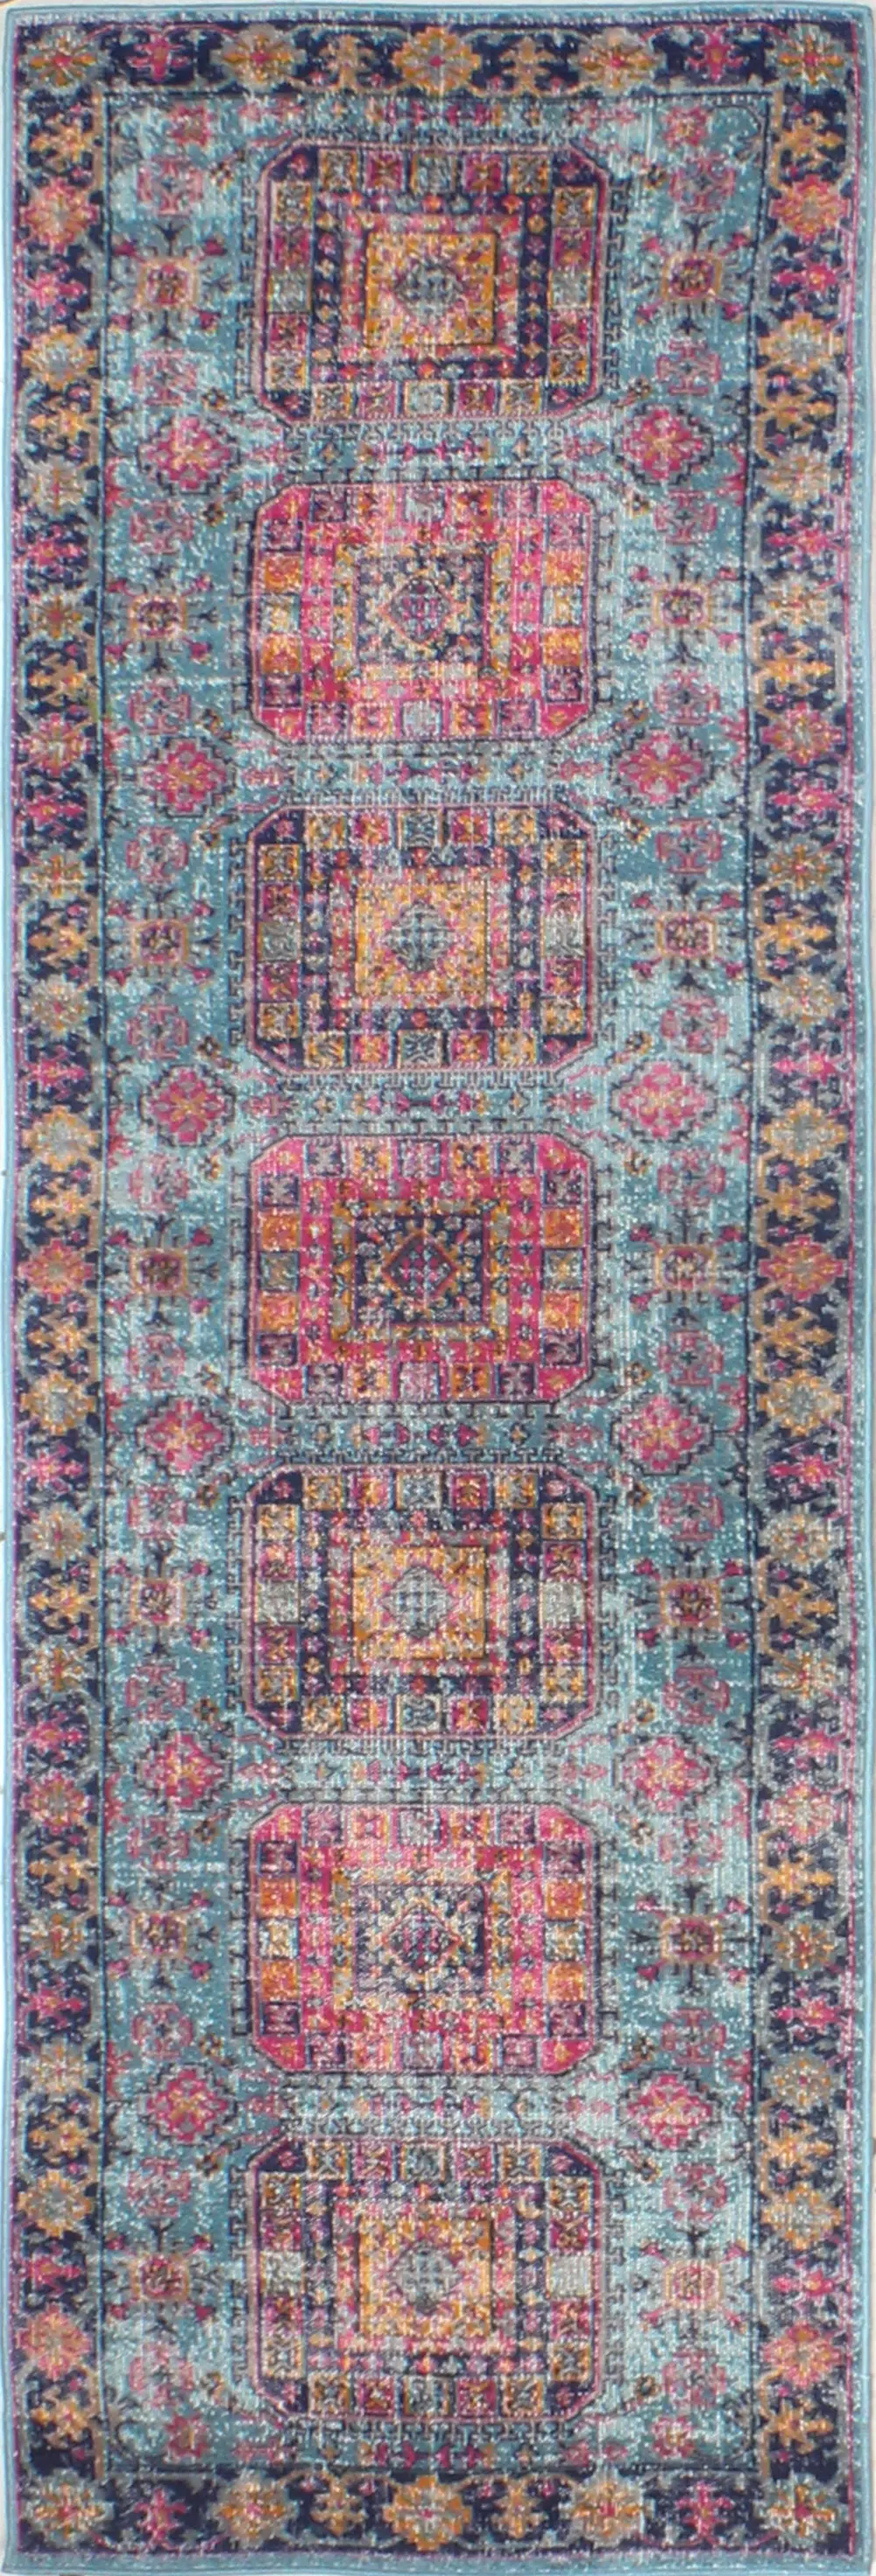 H114-TE-2.6X8-Z042A Traditional Fausto Pink and Blue 8 Foot Runner Rug - Heritage-1